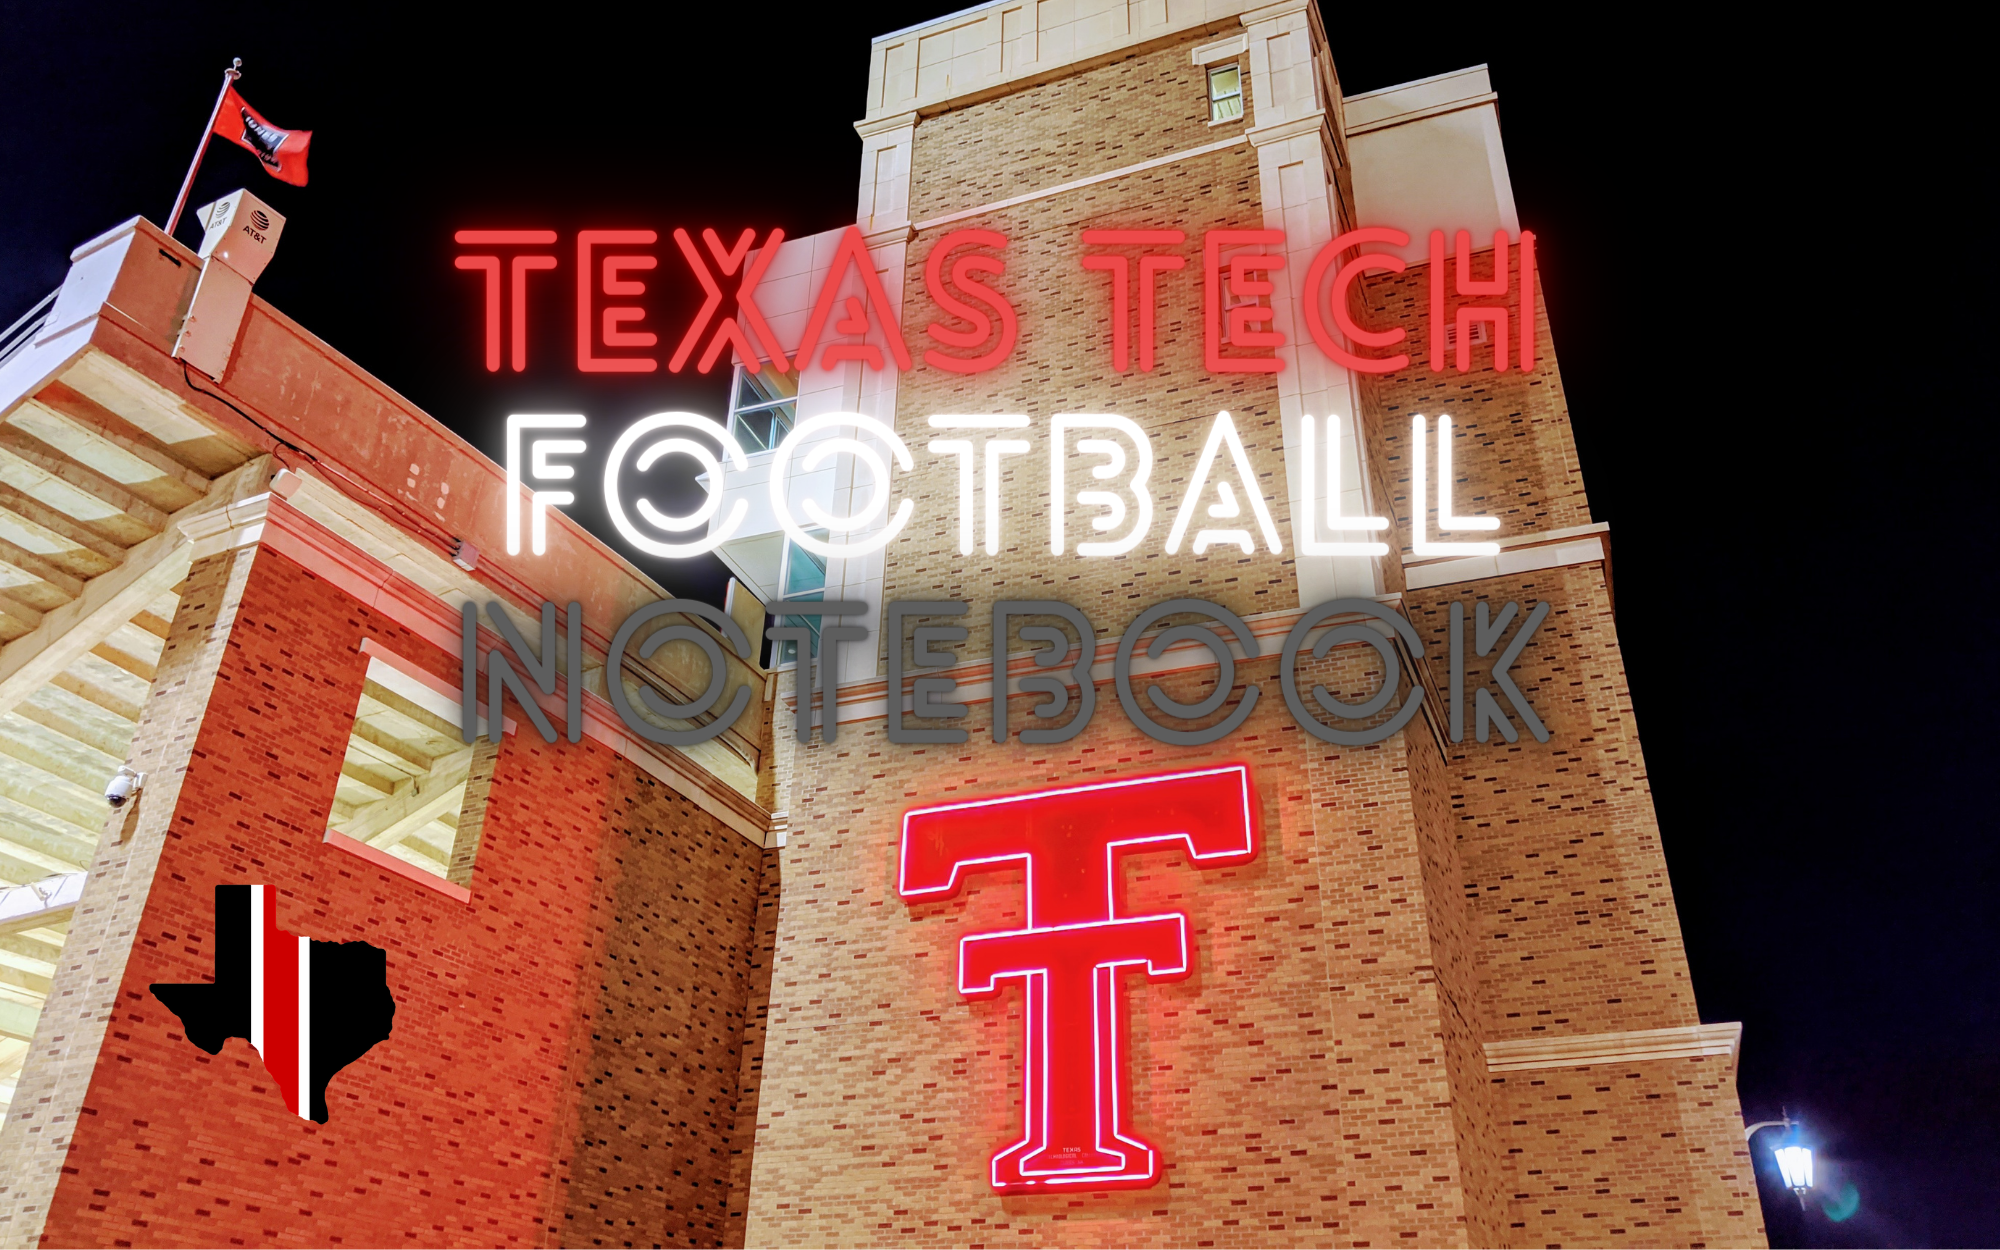 Texas Tech Football Notebook: TCTXFB All-Texas Team; CFB Playoffs to Expand to 12 Teams